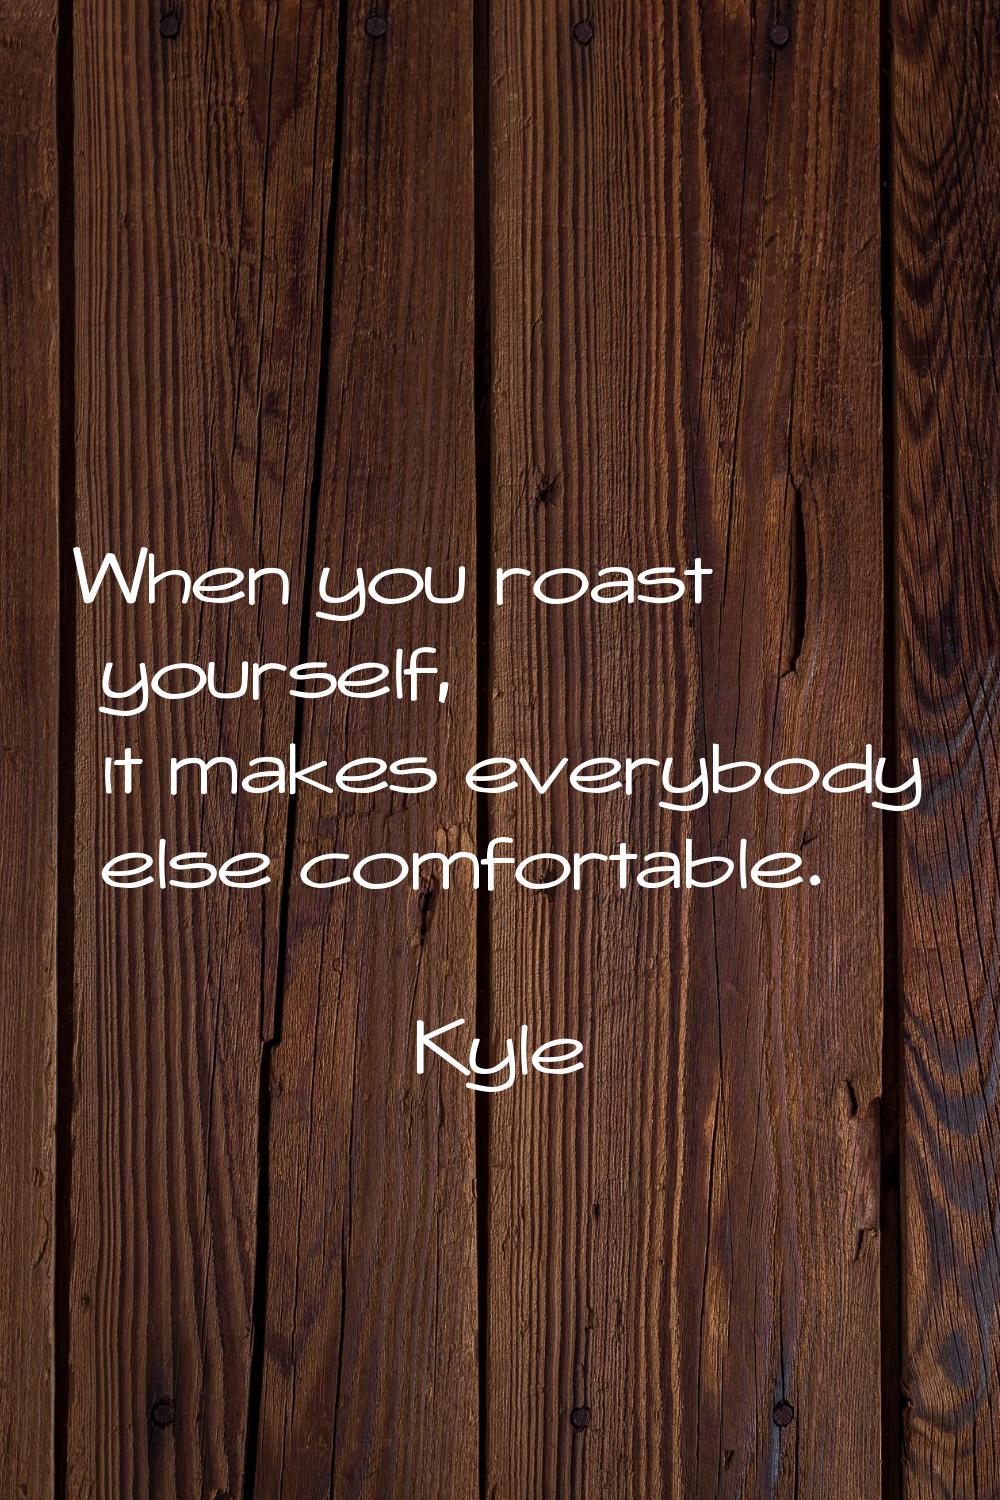 When you roast yourself, it makes everybody else comfortable.